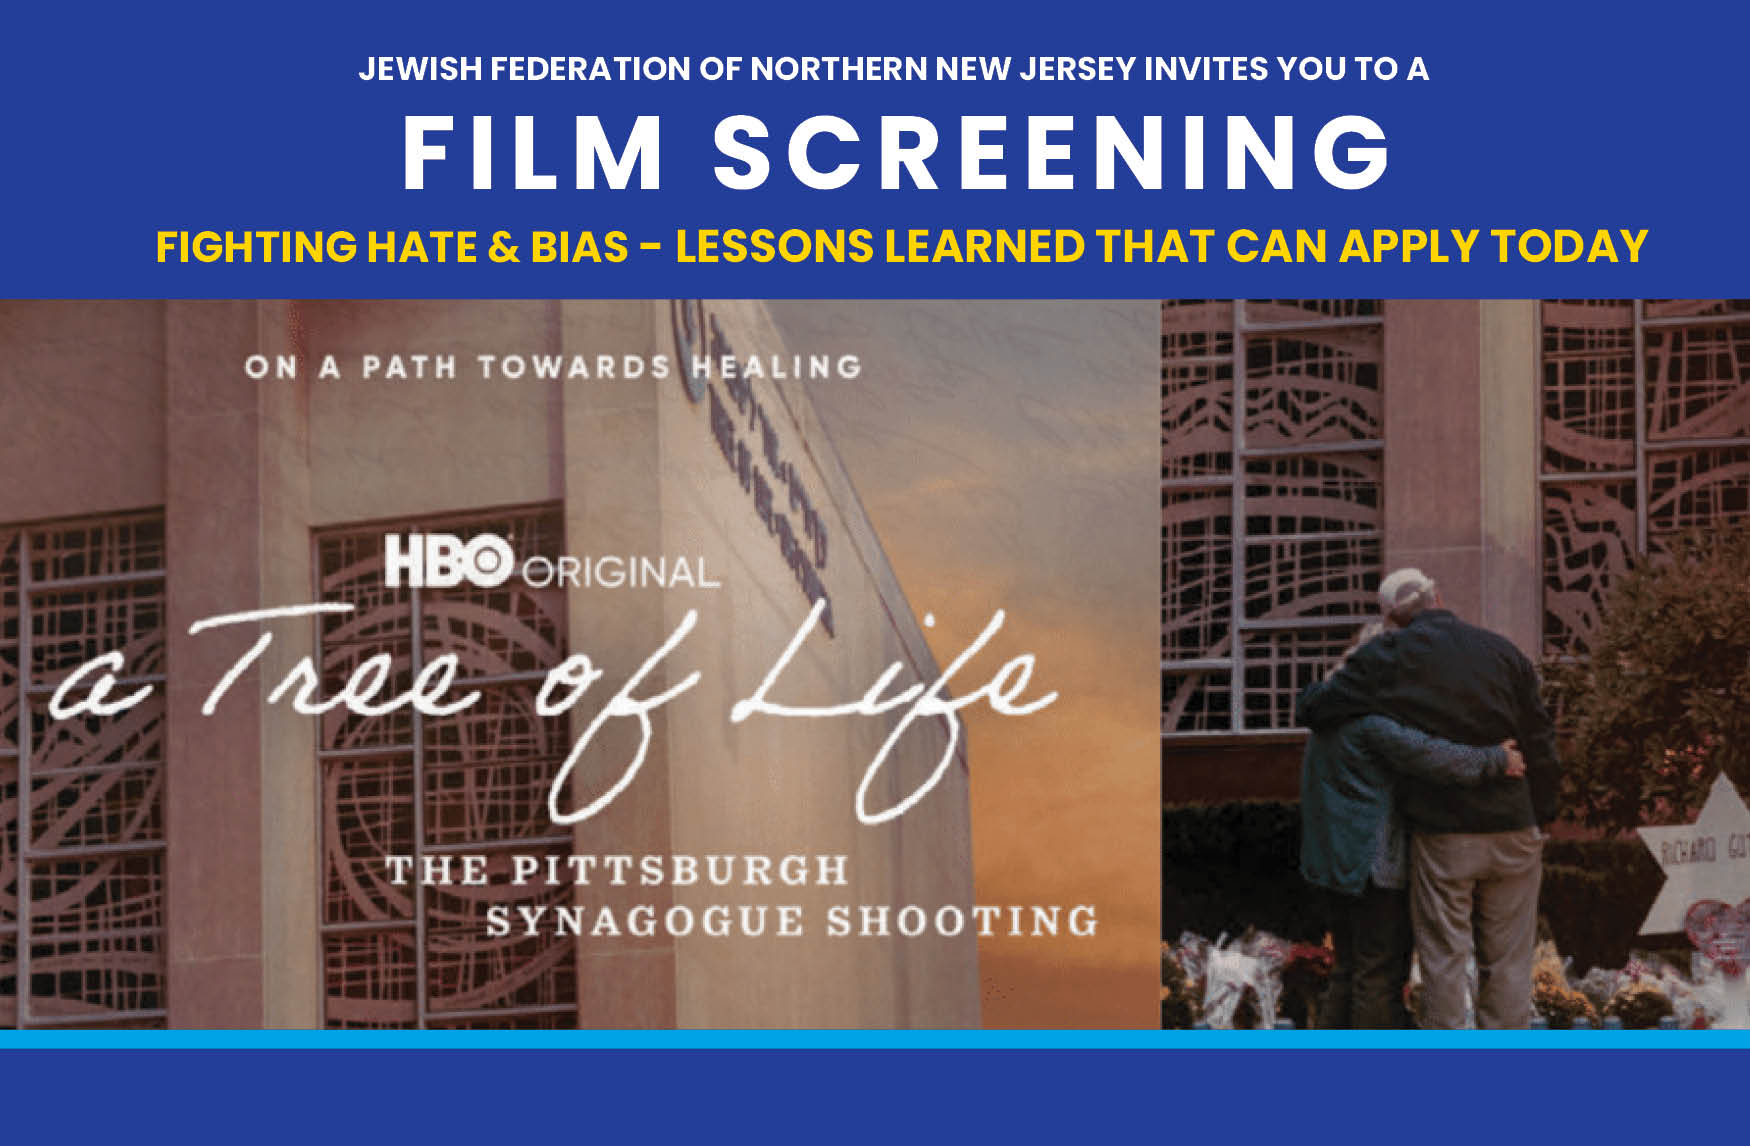 More Info for Film Screening of HBO’s Tree of Life: The Pittsburgh Synagogue Shooting